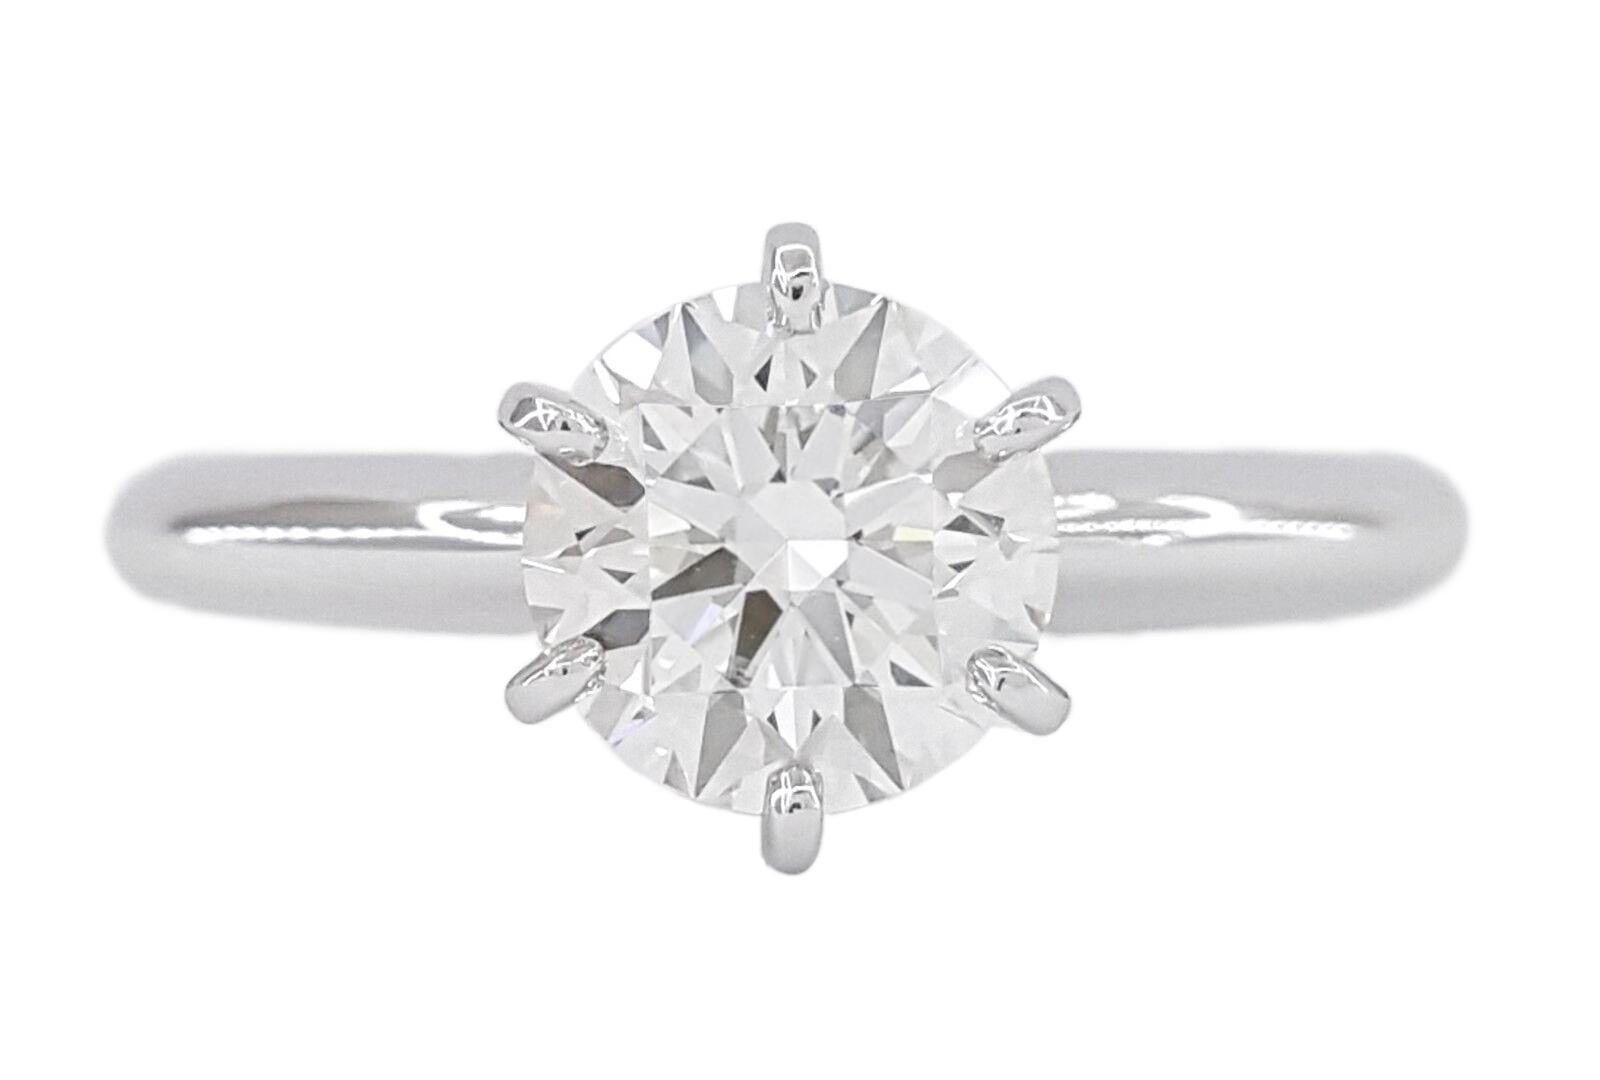 This exquisite jewelry piece showcases a meticulously selected and certified by the GIA 1,00 Ct round Brilliant Cut diamond exuding unparalleled brilliance and allure. Nestled within an elegant 18k white gold solitaire setting, this diamond is a